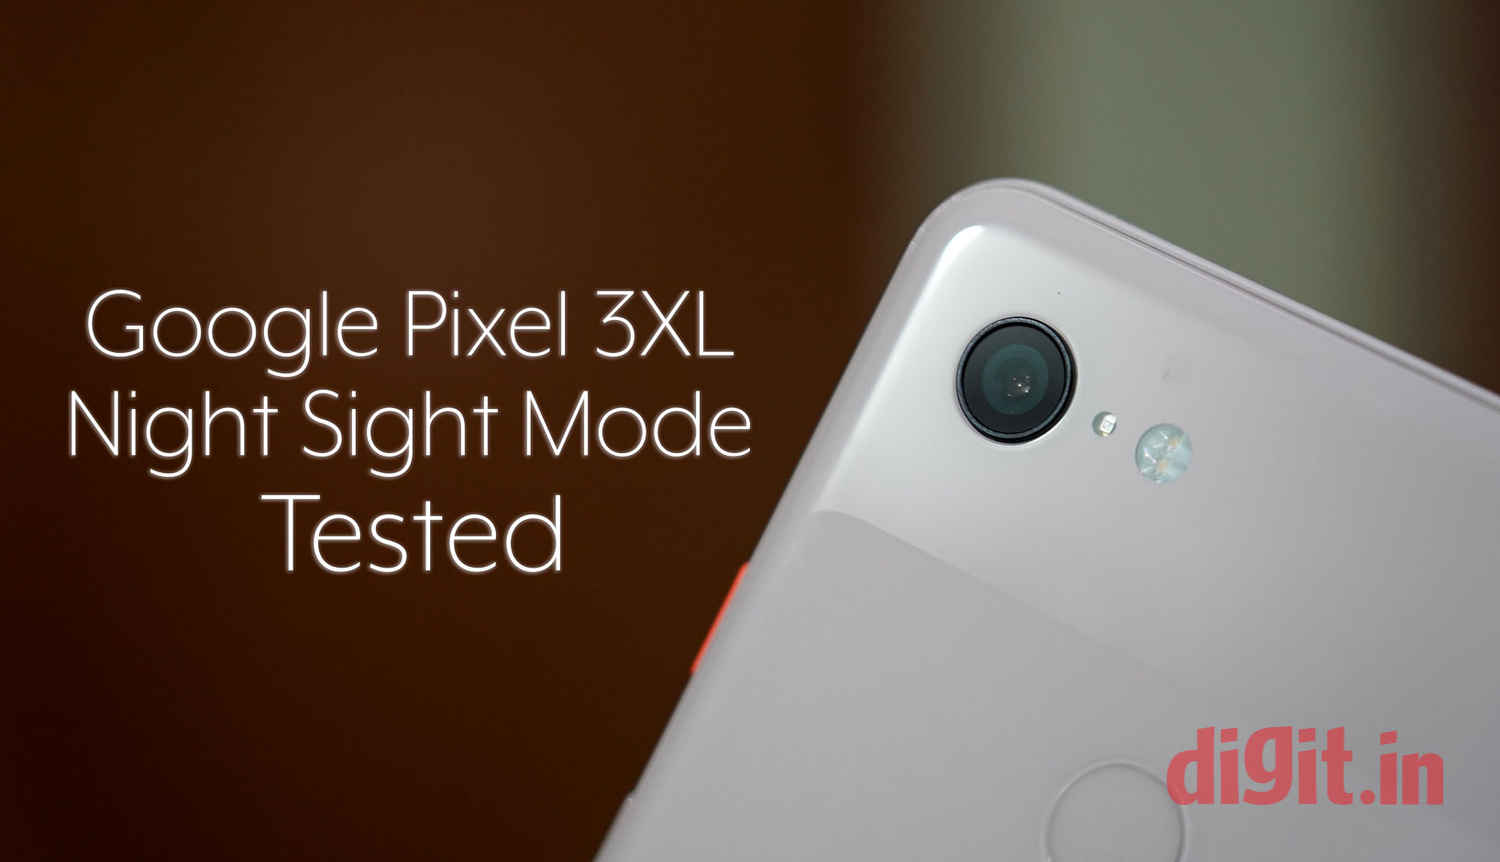 Google Pixel 3XL Night Sight mode: A big step in the right direction